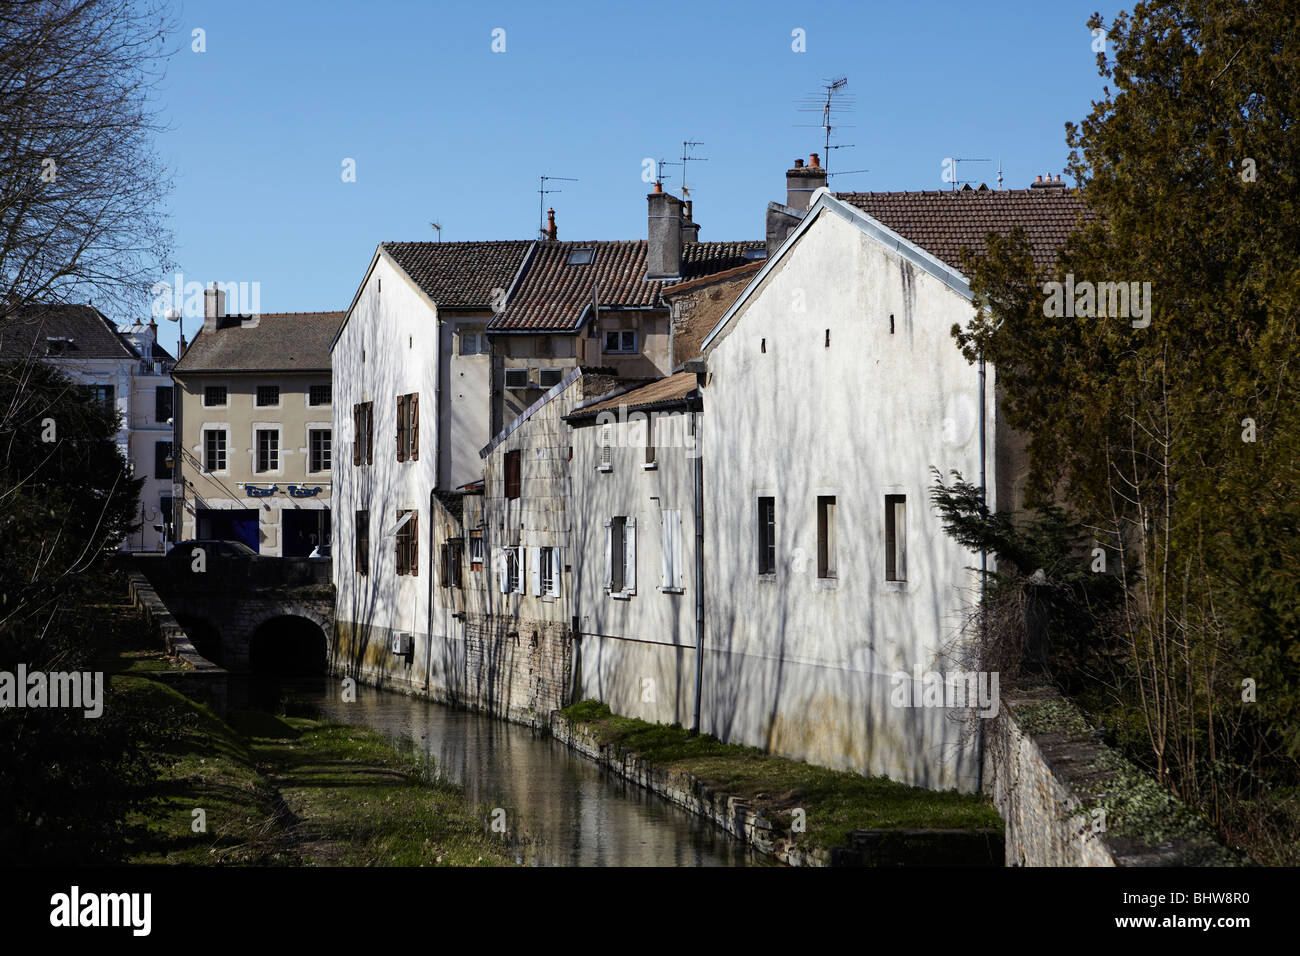 River flowing past riverside properties in Beaune, France Stock Photo